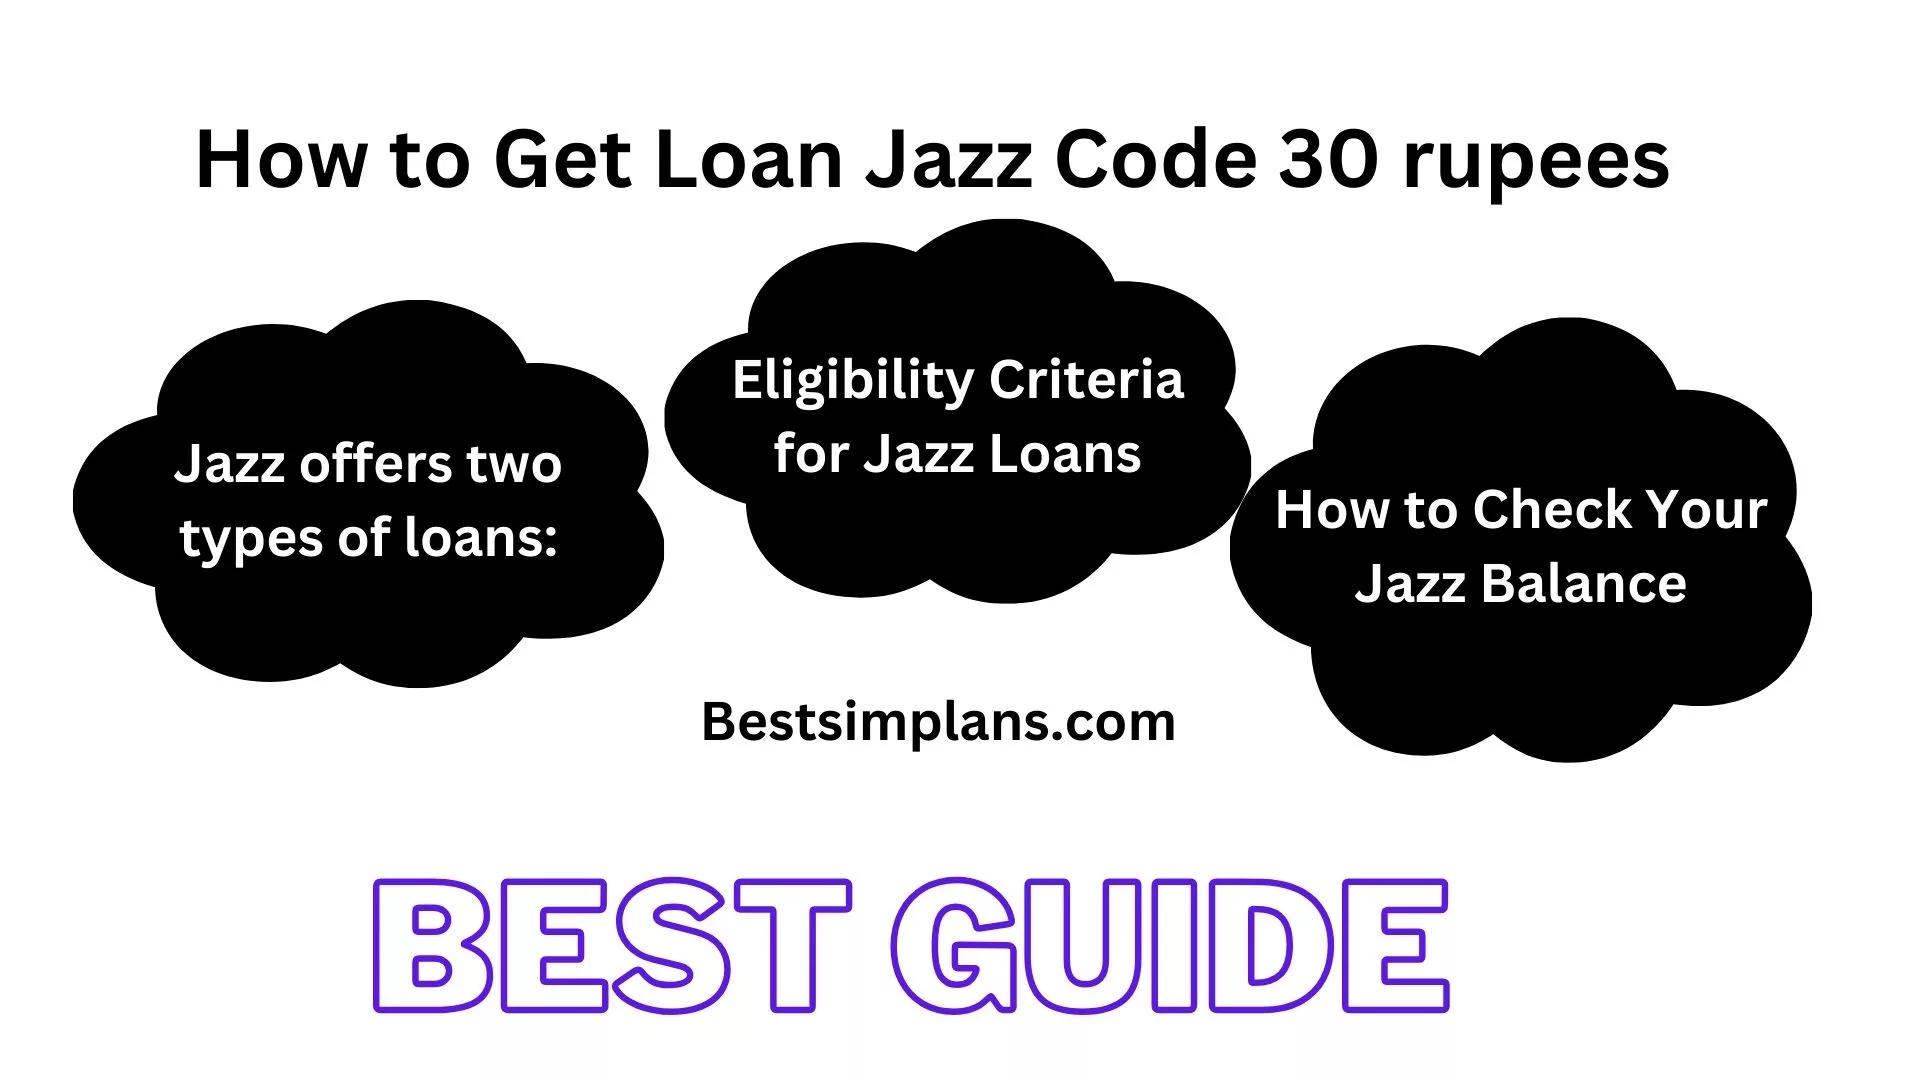 How to Get Loan Jazz Code 30 rupees